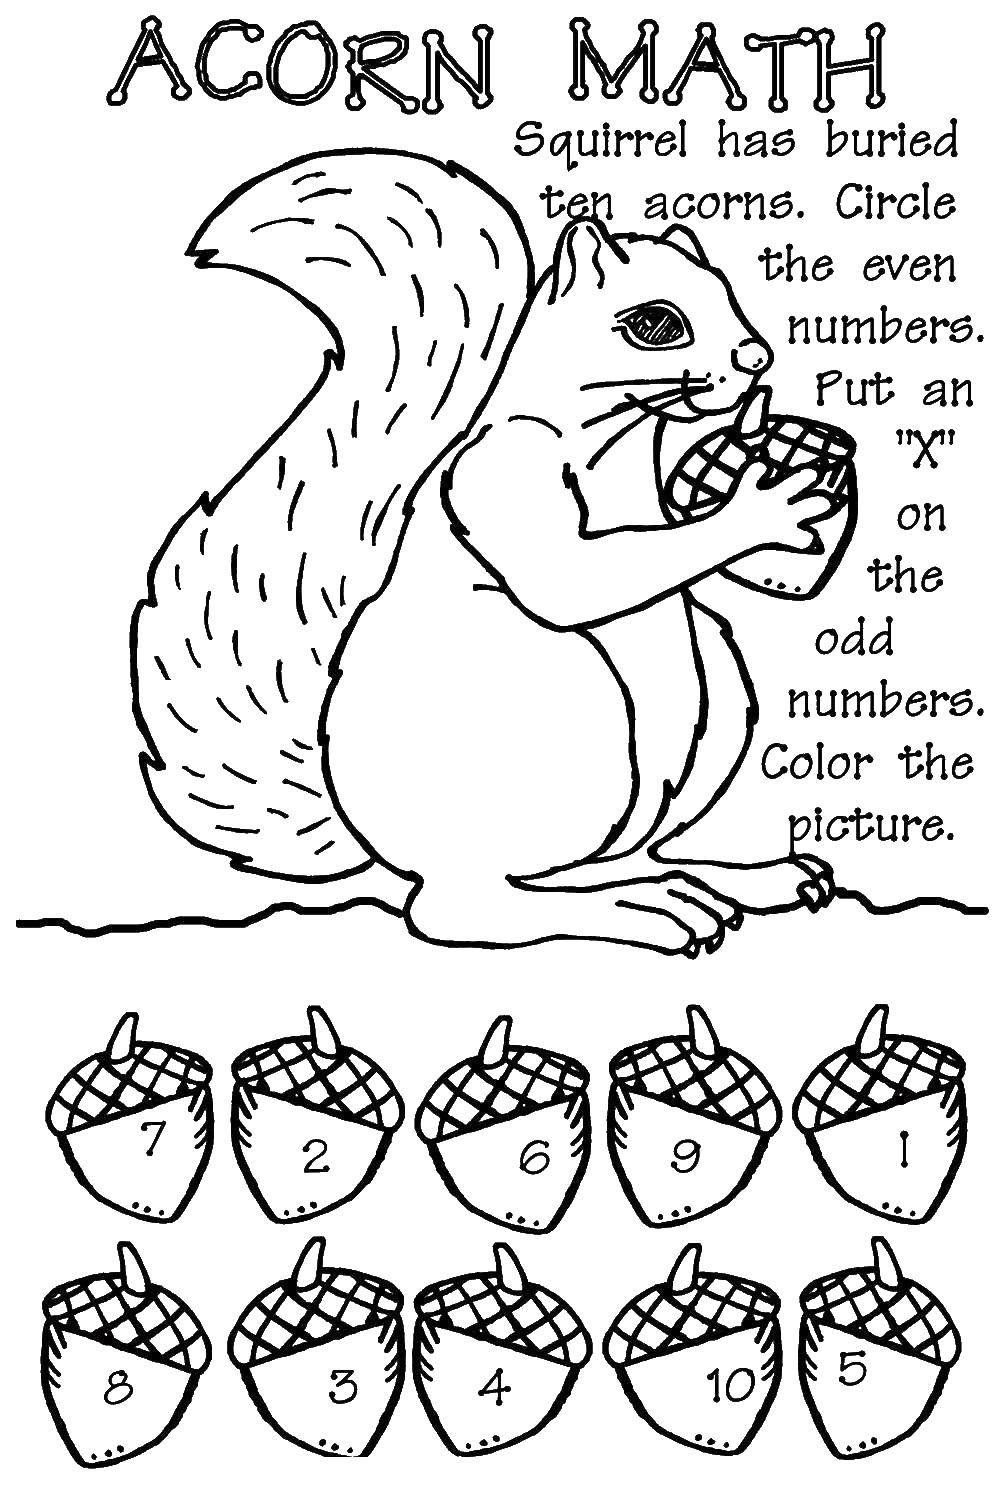 Coloring A squirrel collects nuts. Category animals. Tags:  animals, squirrel, nuts.